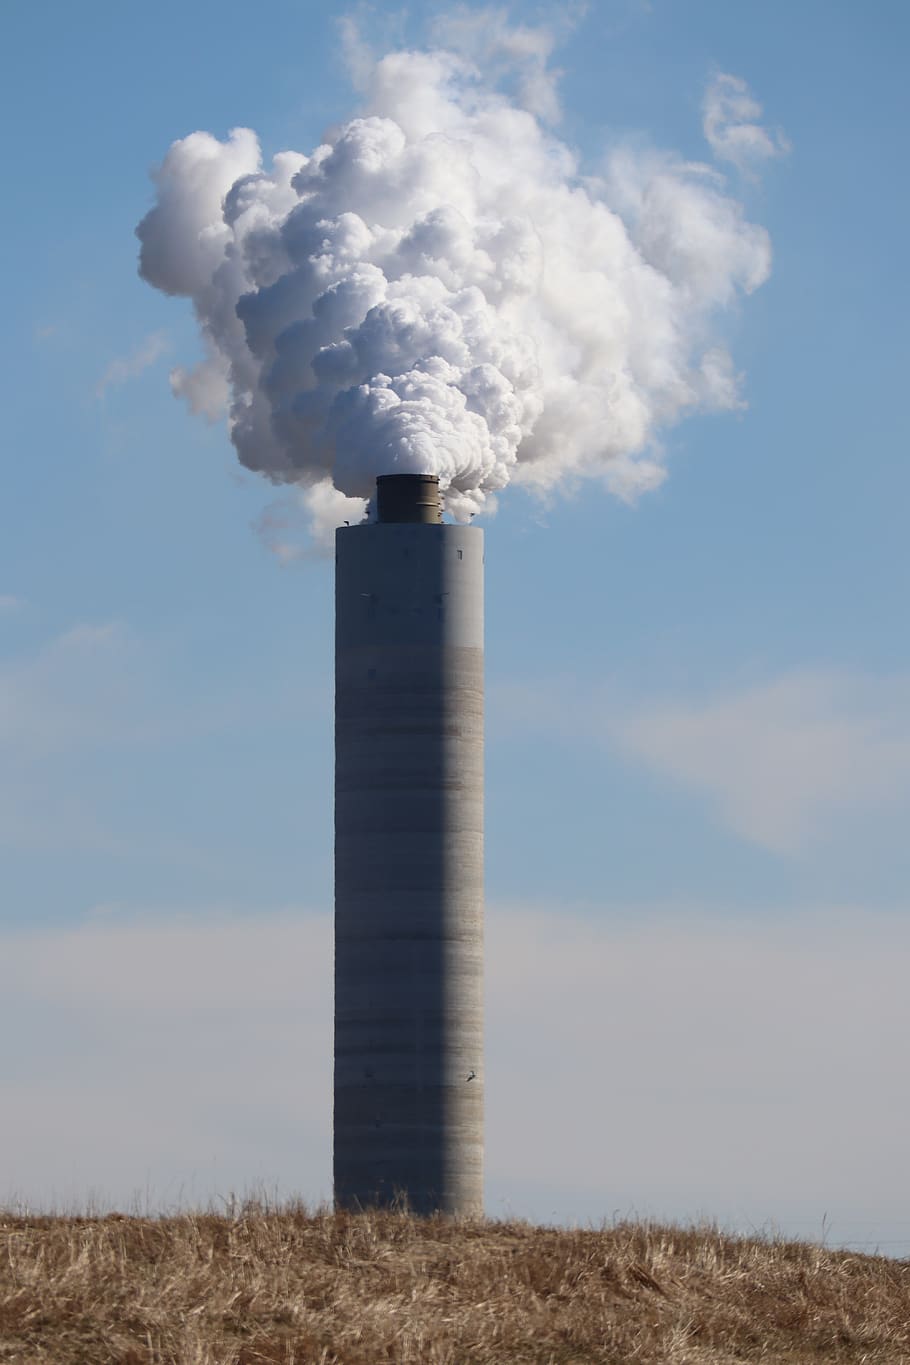 pollution, air pollution, smoke, smokestack, power plant, sky, cloud - sky, environment, smoke - physical structure, day